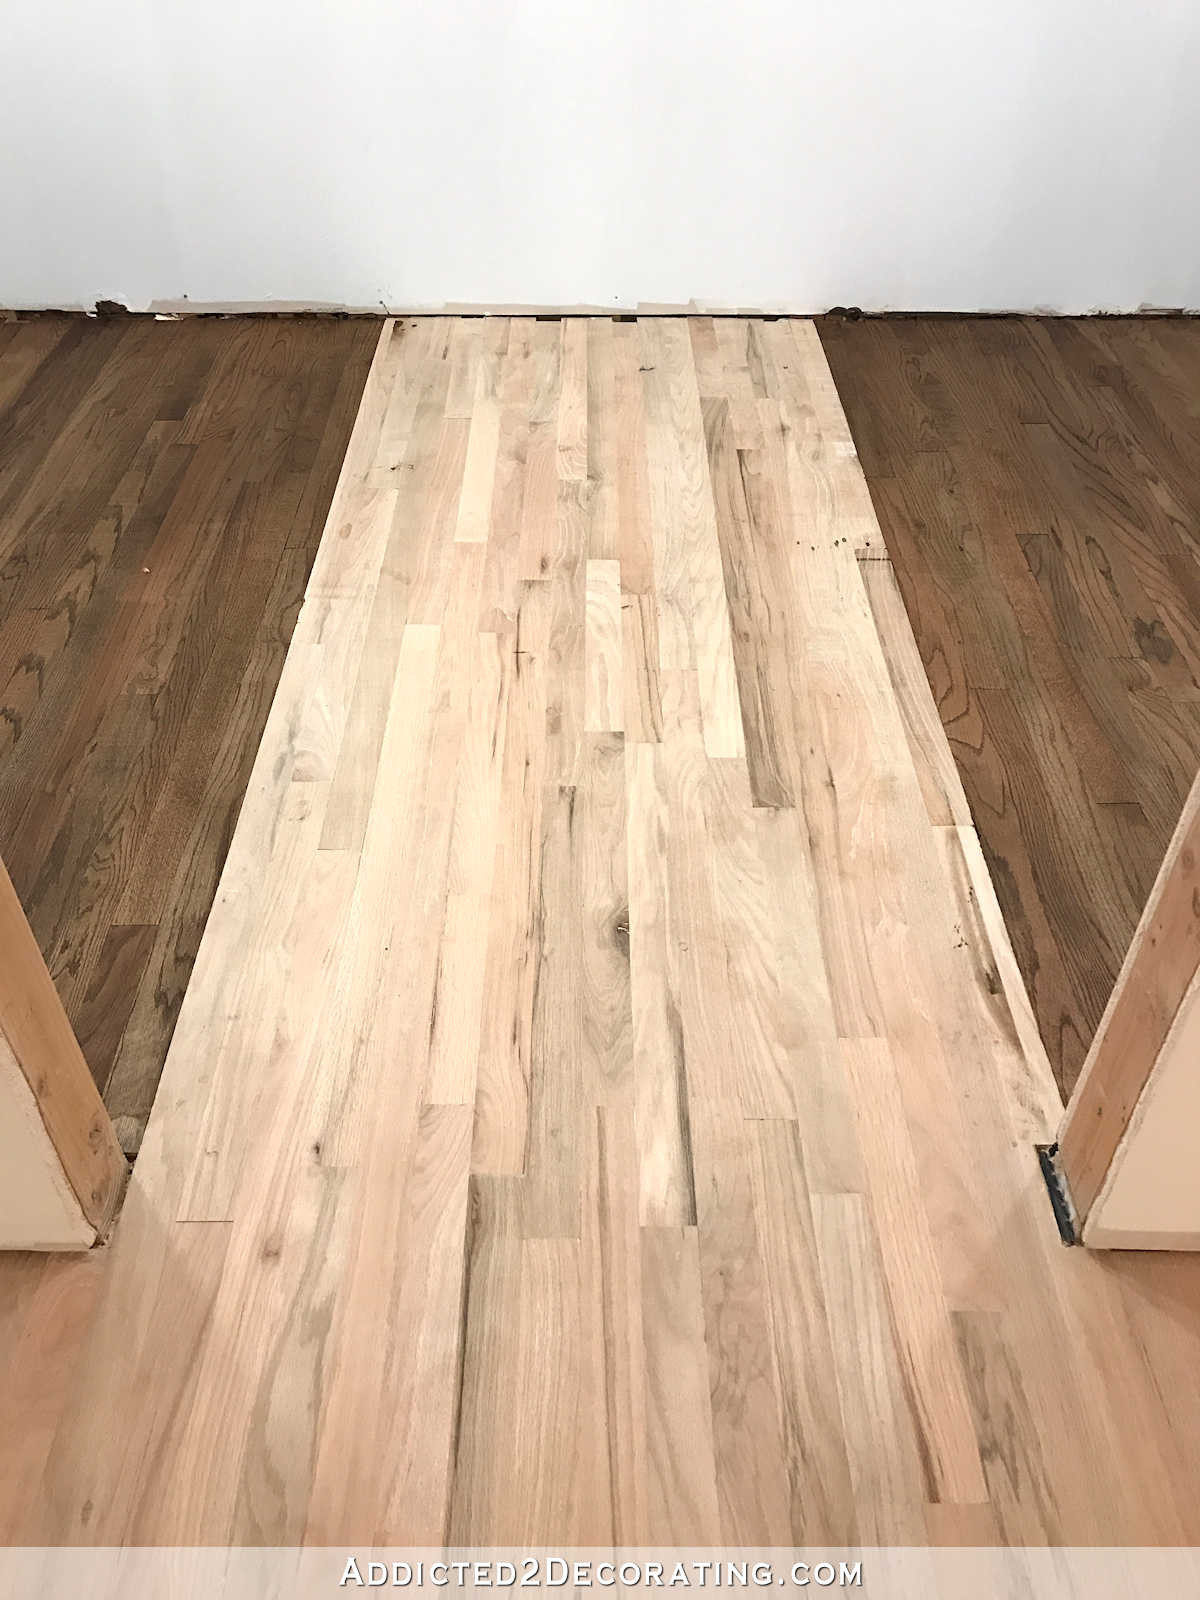 14 Stunning Walnut Hardwood Floor Colors 2022 free download walnut hardwood floor colors of adventures in staining my red oak hardwood floors products process within staining red oak hardwood floors 11 stain on left and right sides of the